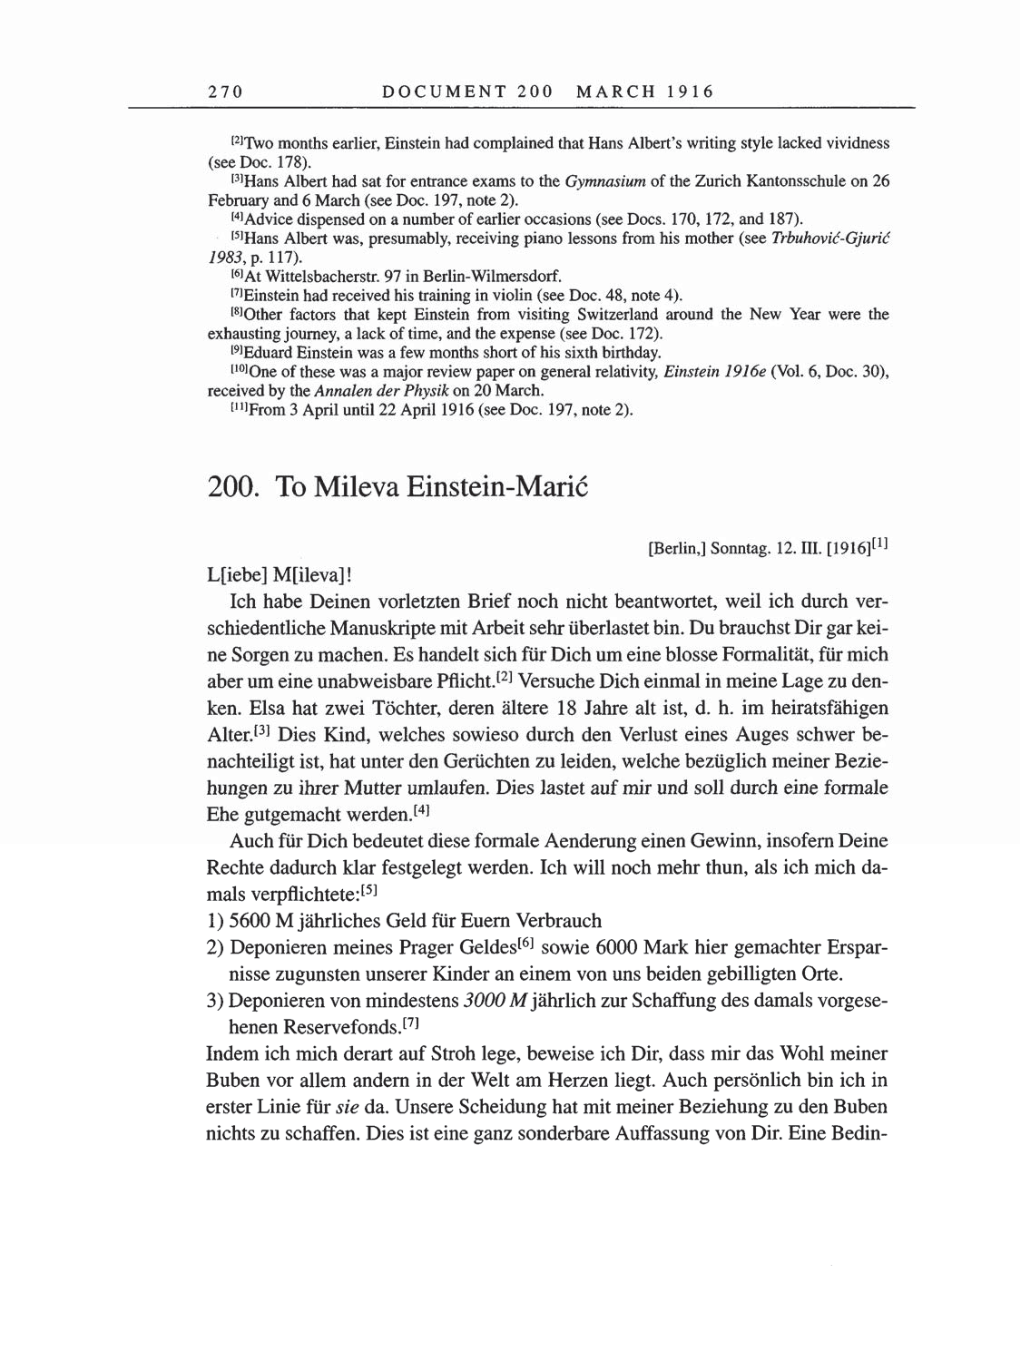 Volume 8, Part A: The Berlin Years: Correspondence 1914-1917 page 270